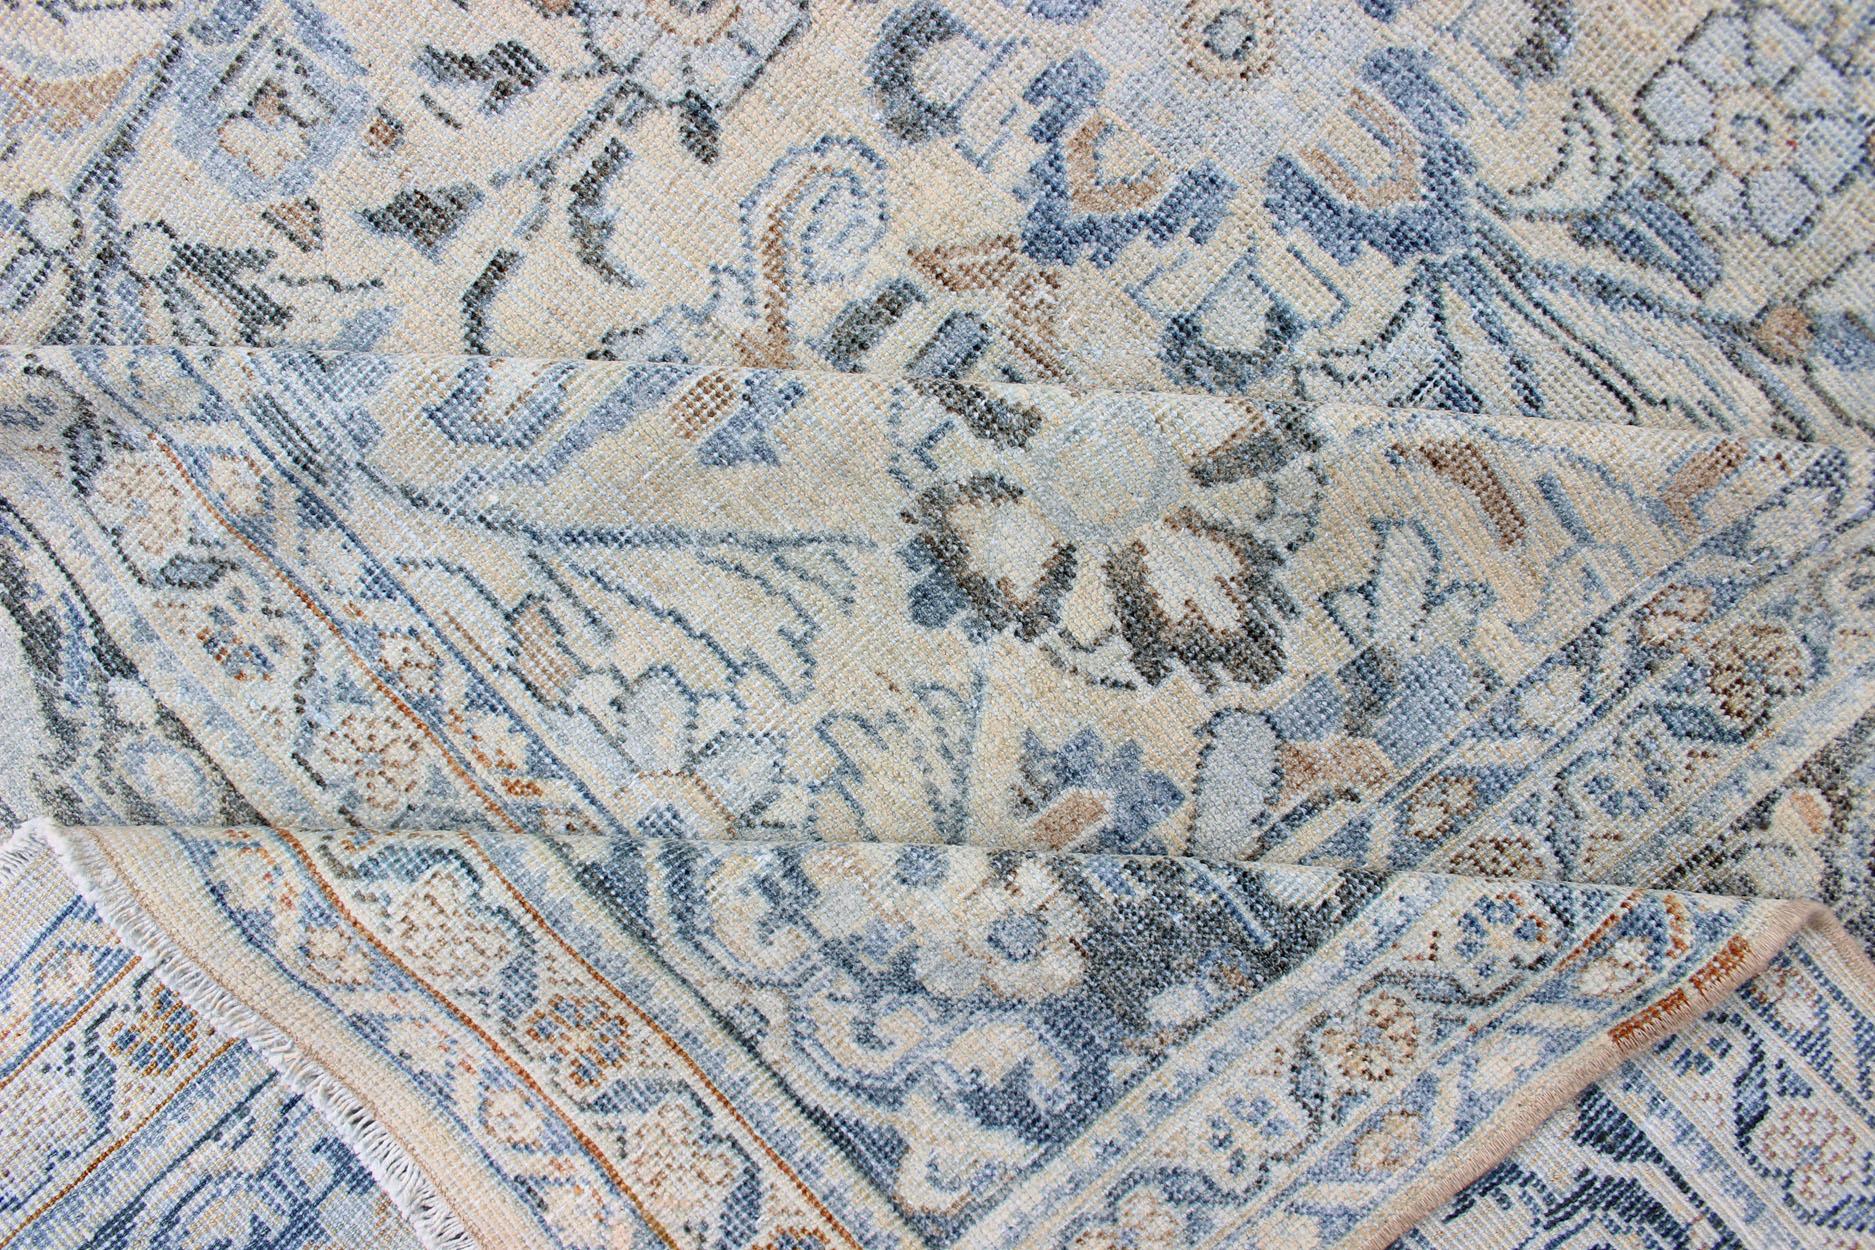 Wool Antique Persian Mahal Rug with Sub Floral Design in Blue, Charcoal & Cream